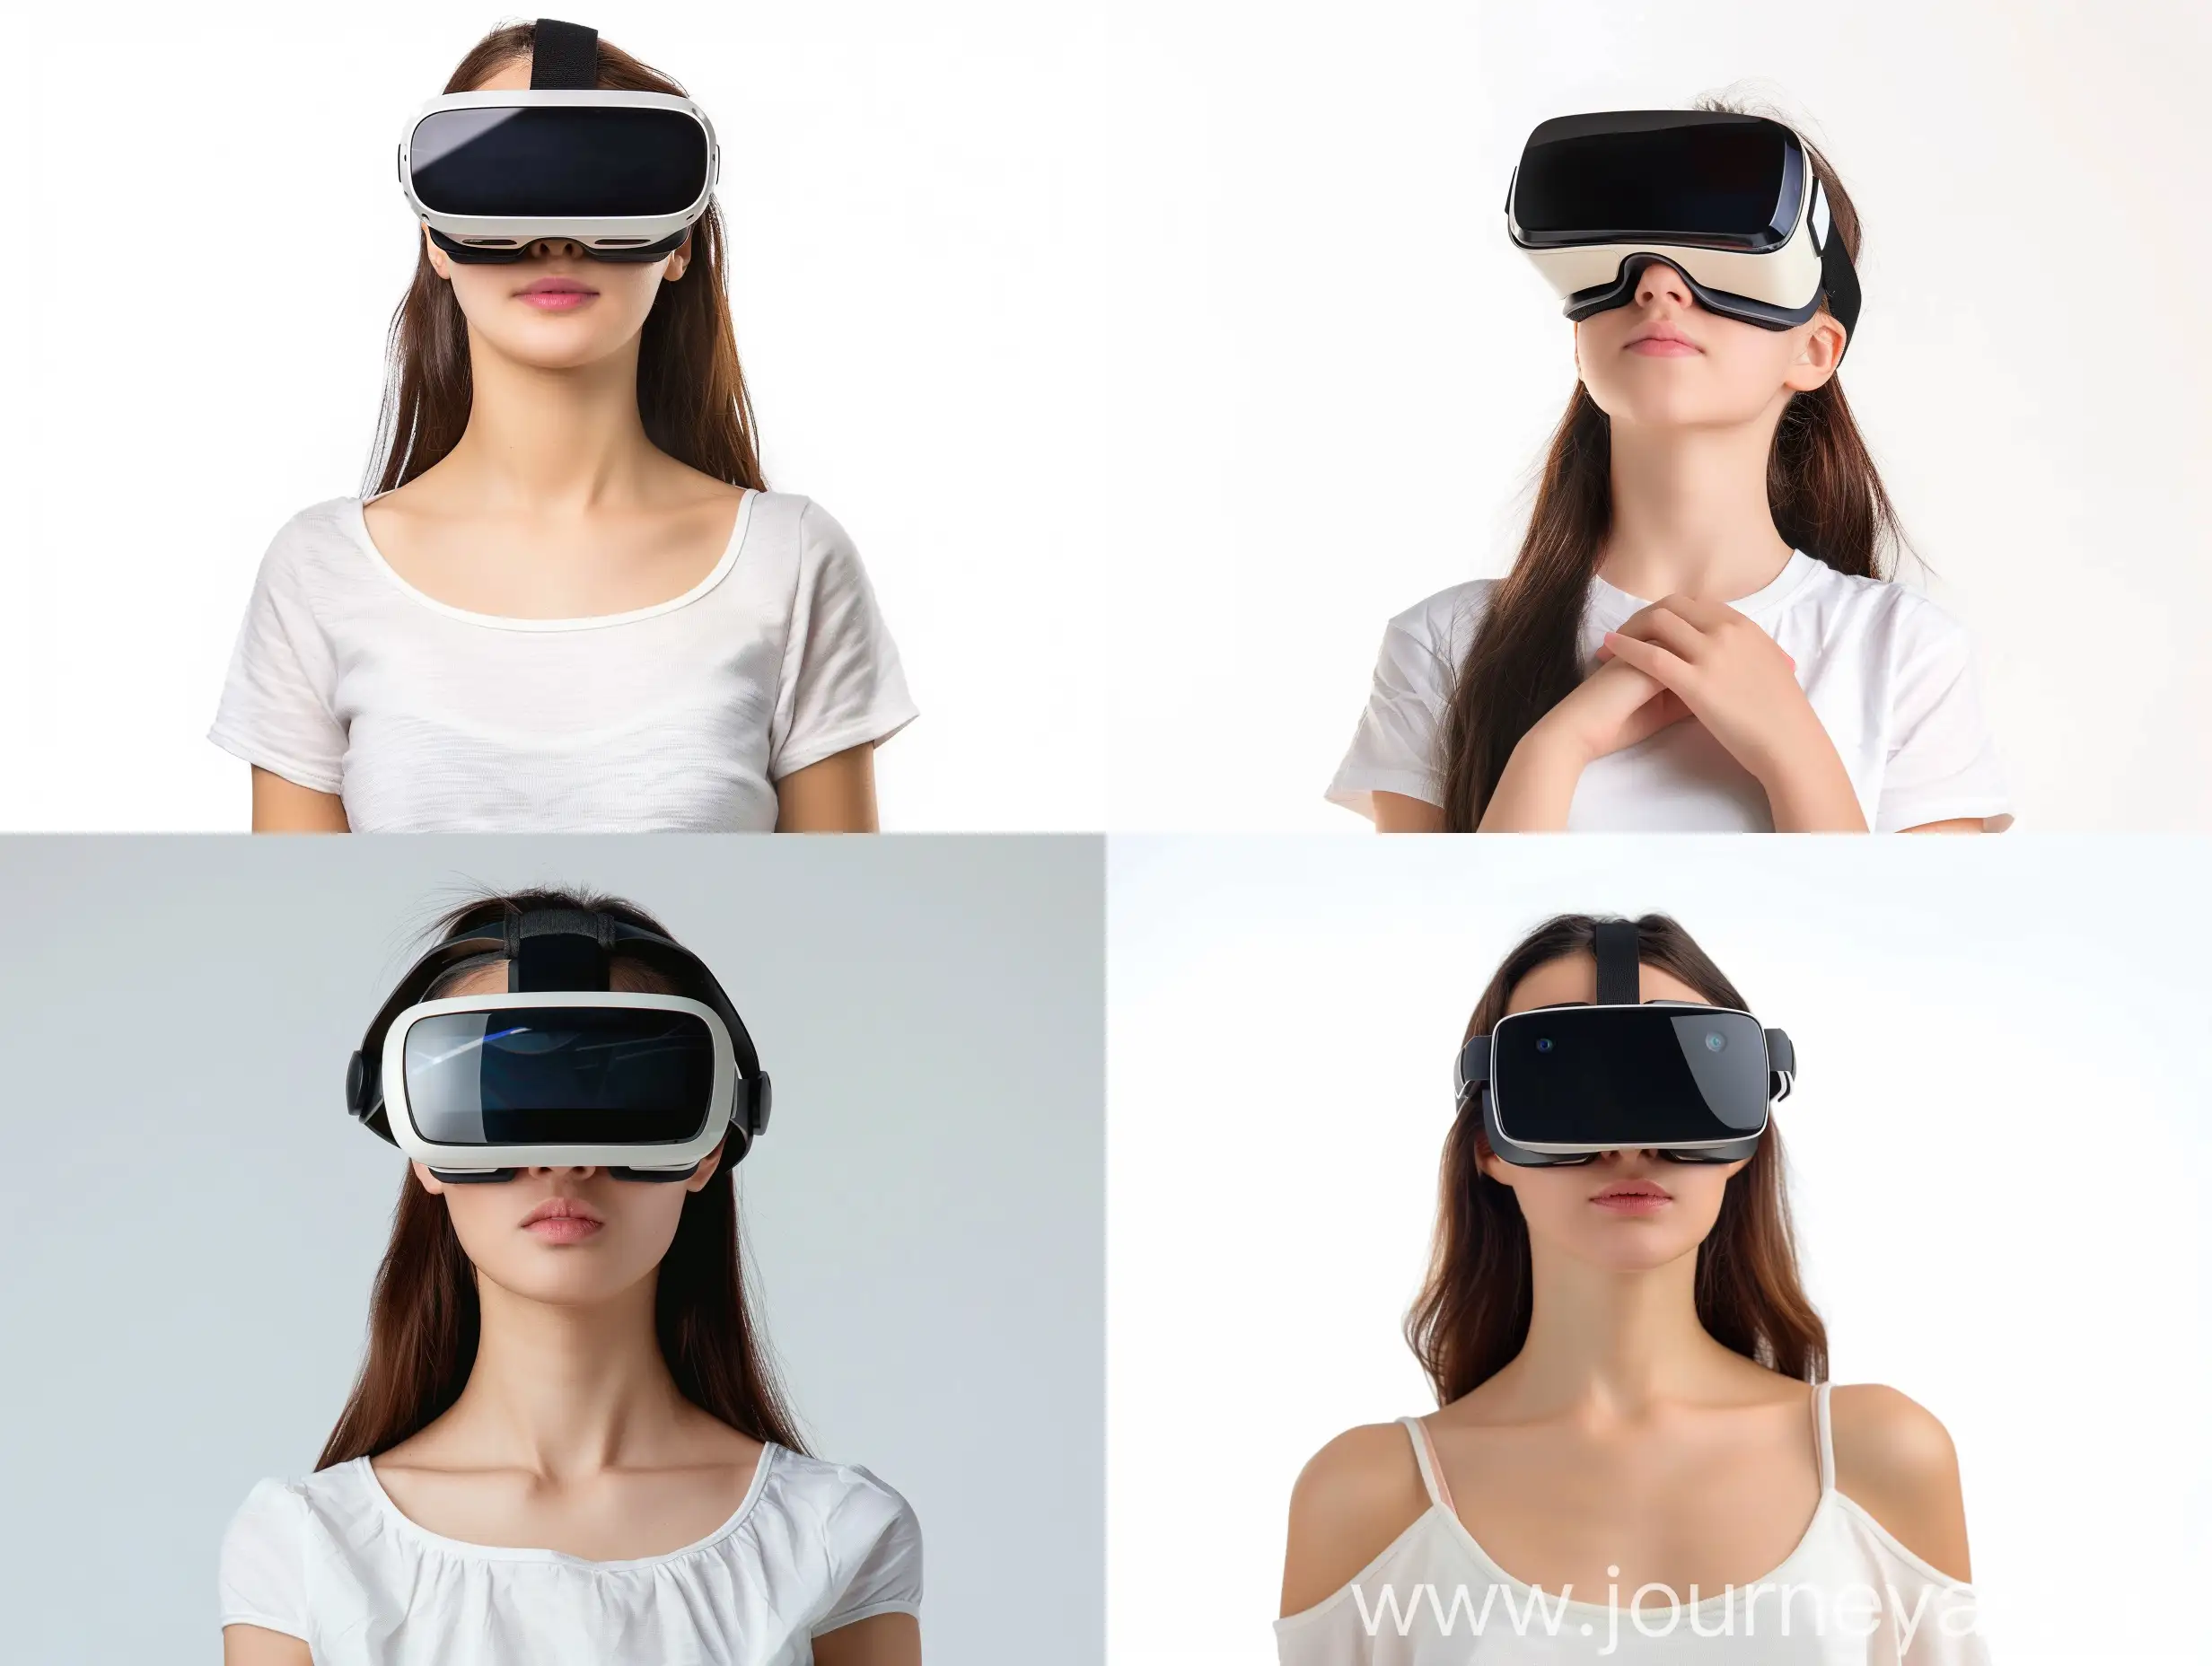 Young-Girl-Wearing-Virtual-Reality-Glasses-on-White-Background